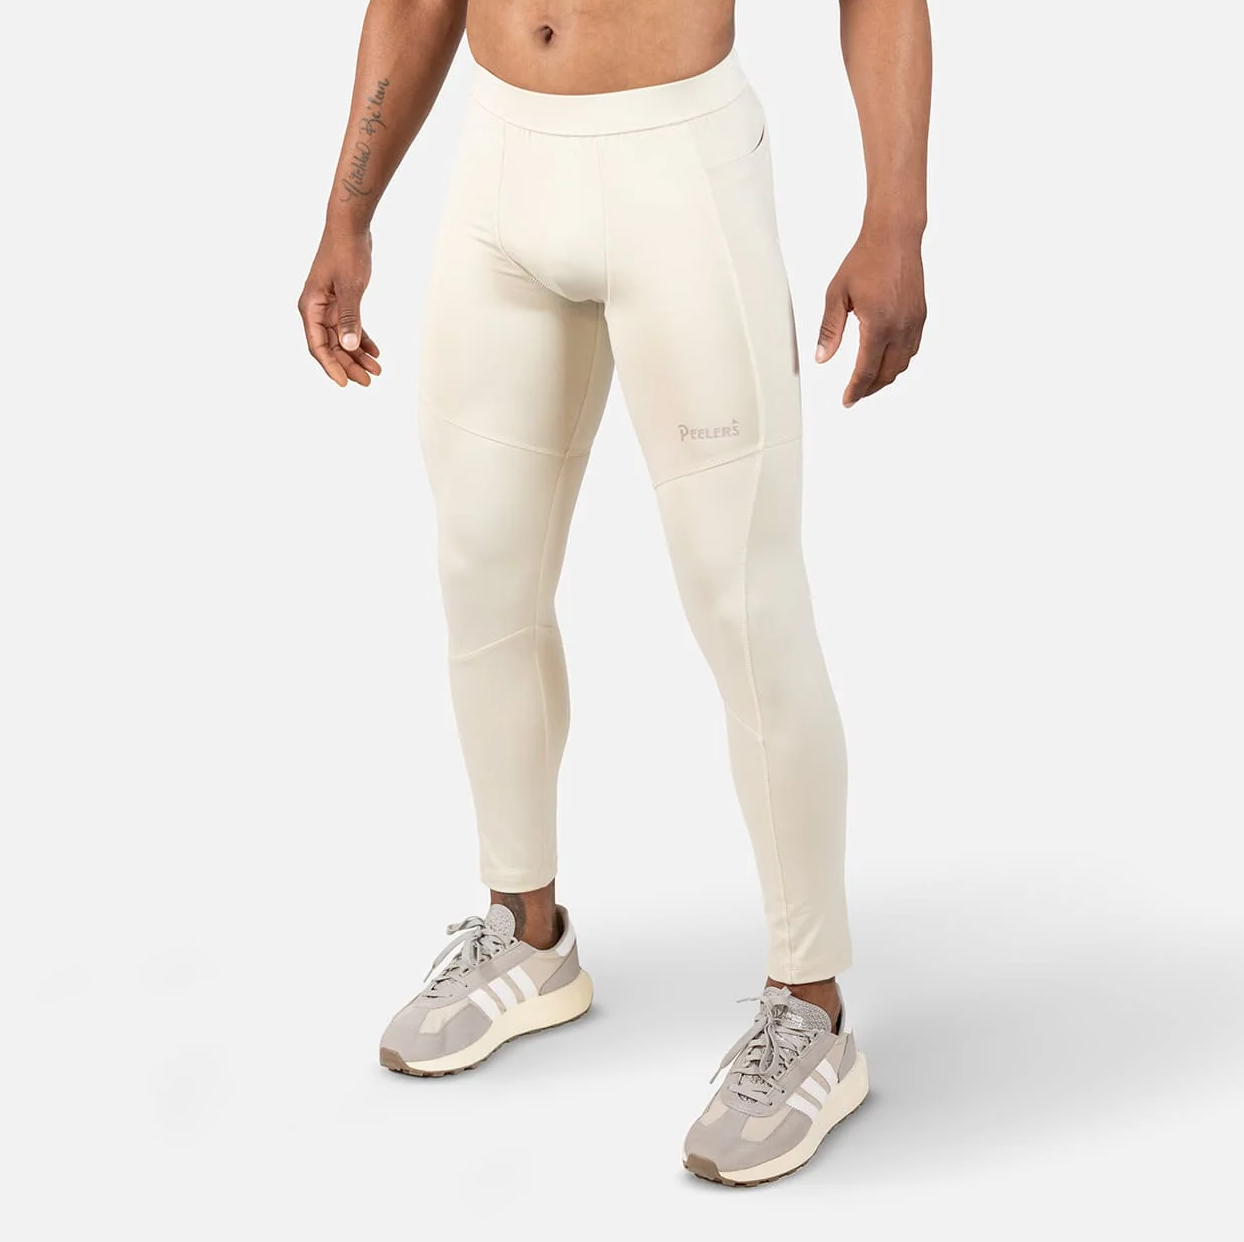 AgilityPro Compression Pant